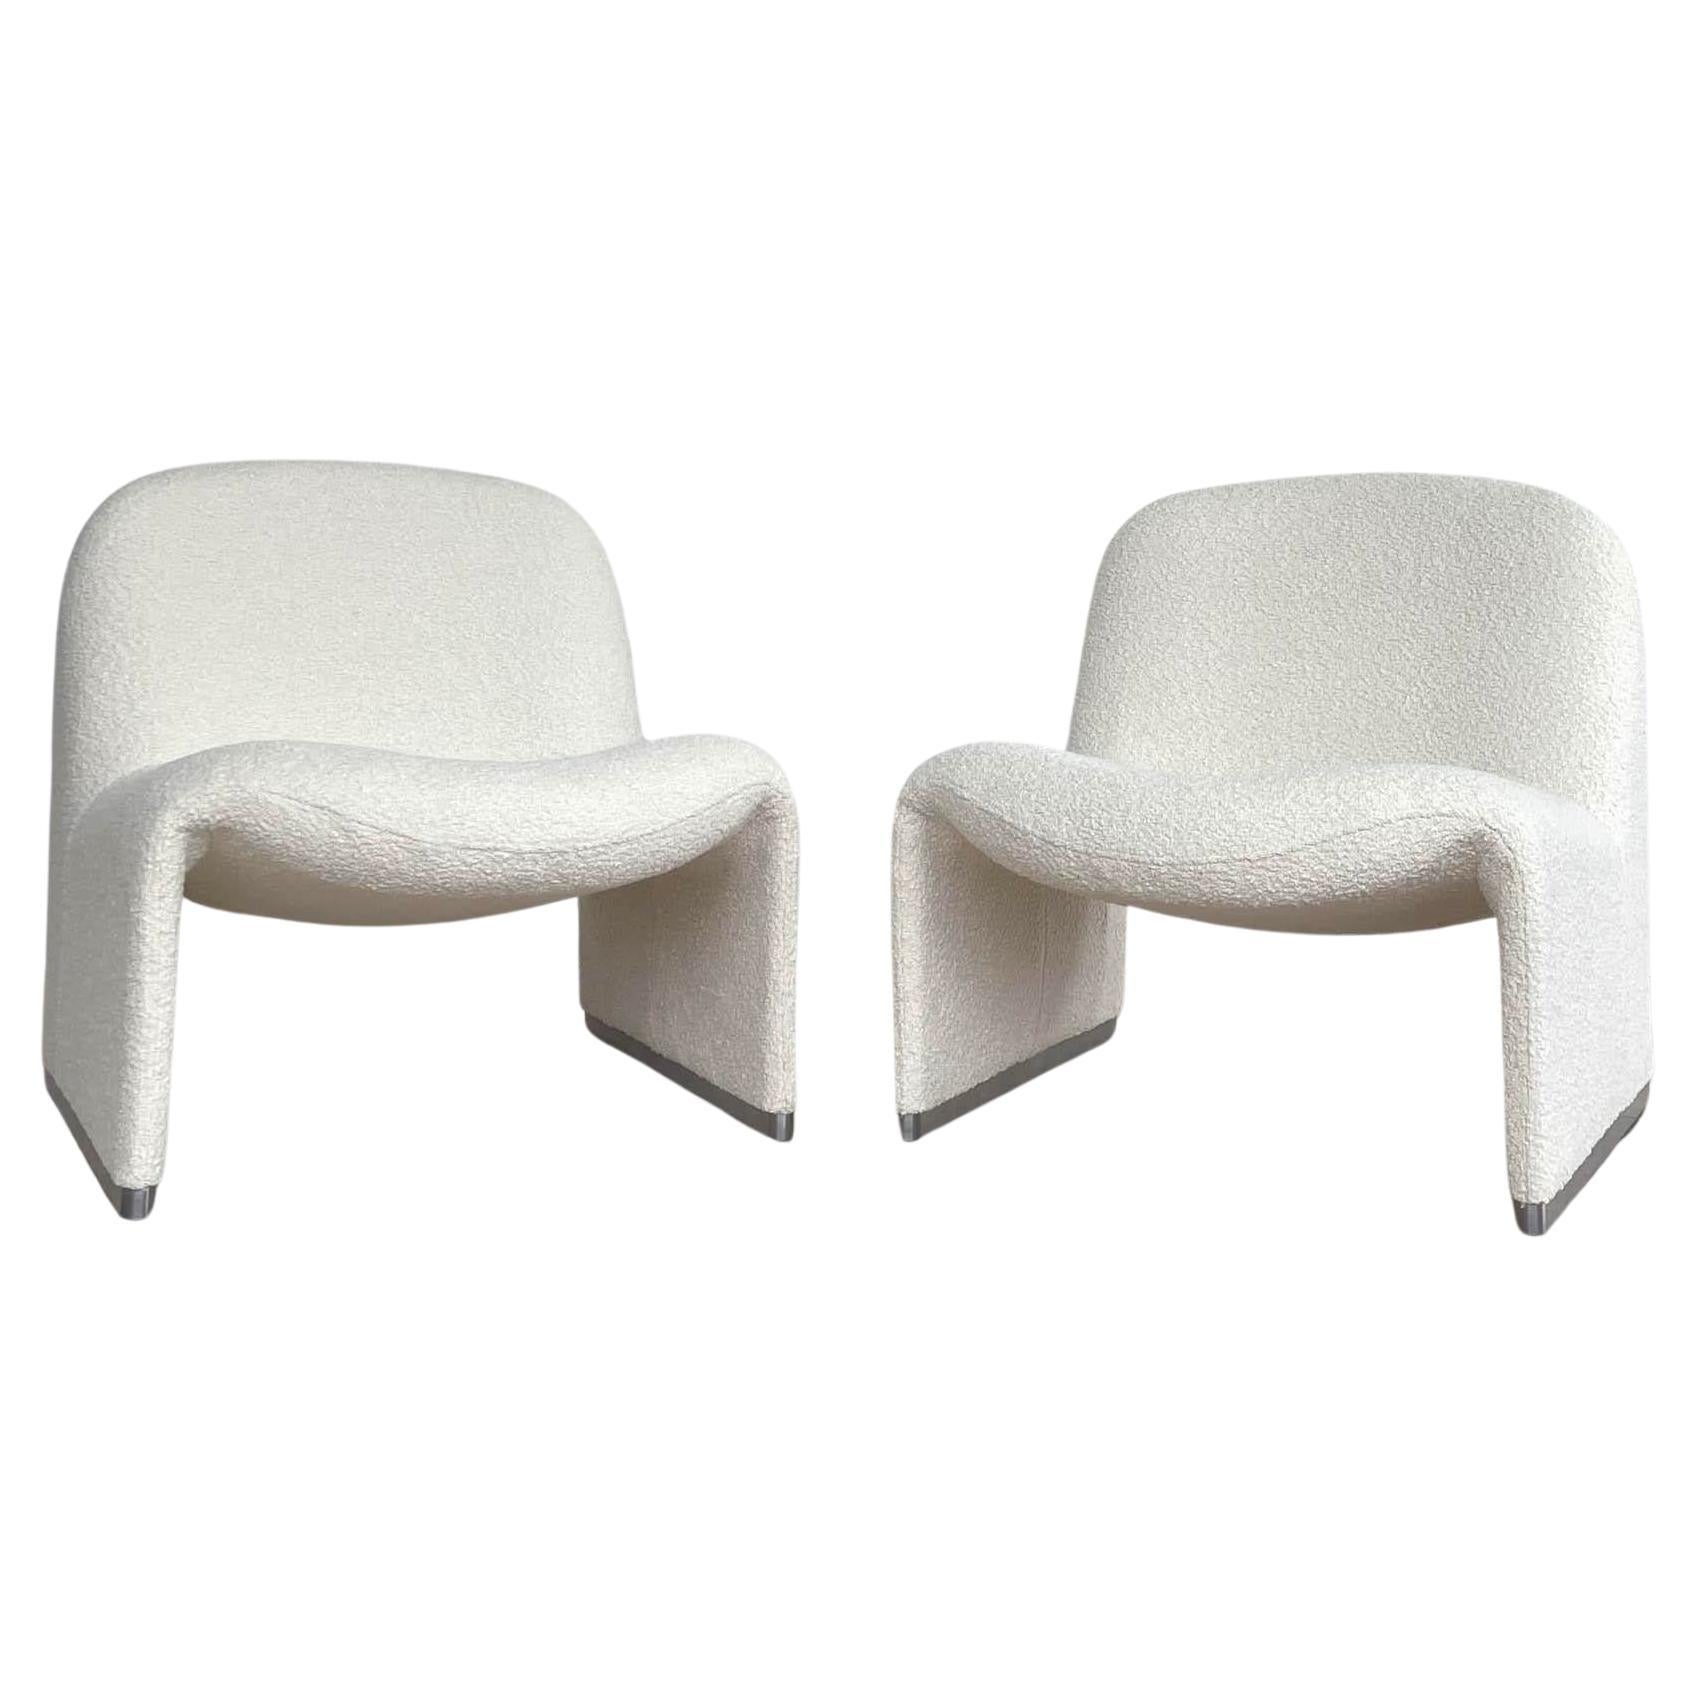 Giancarlo Piretti "Alky" Bouclé Shearling Lounge Chairs, a Pair, 1969 For Sale